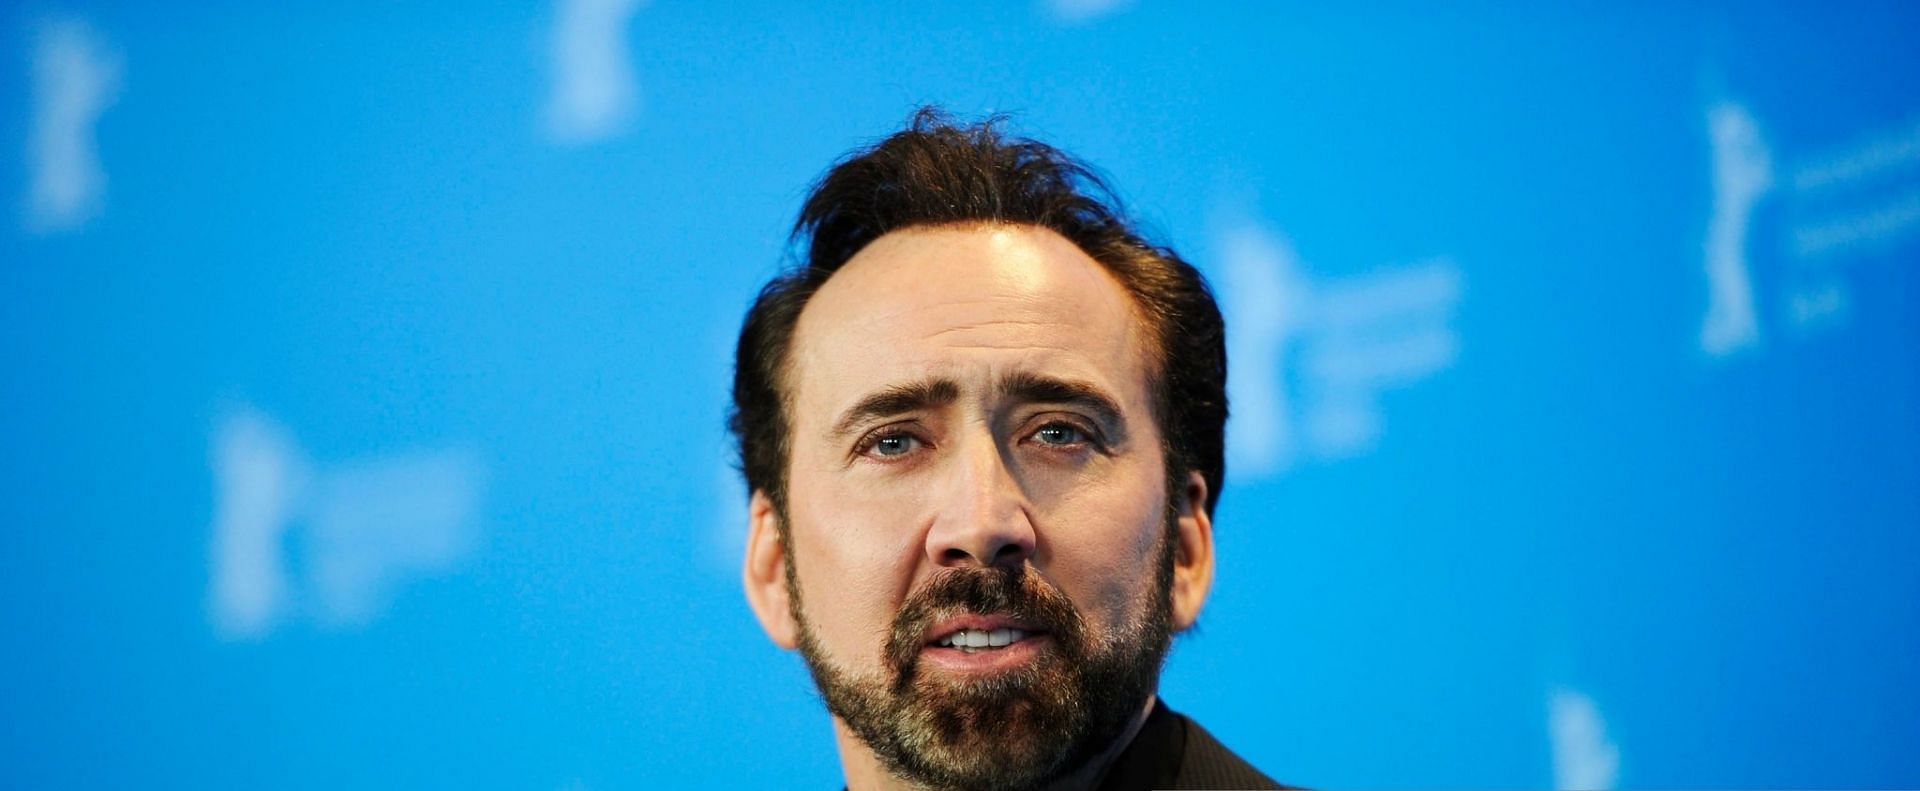 Nicolas Cage has been married five times in his life (Image via Luca Teuchmann/Getty Images)